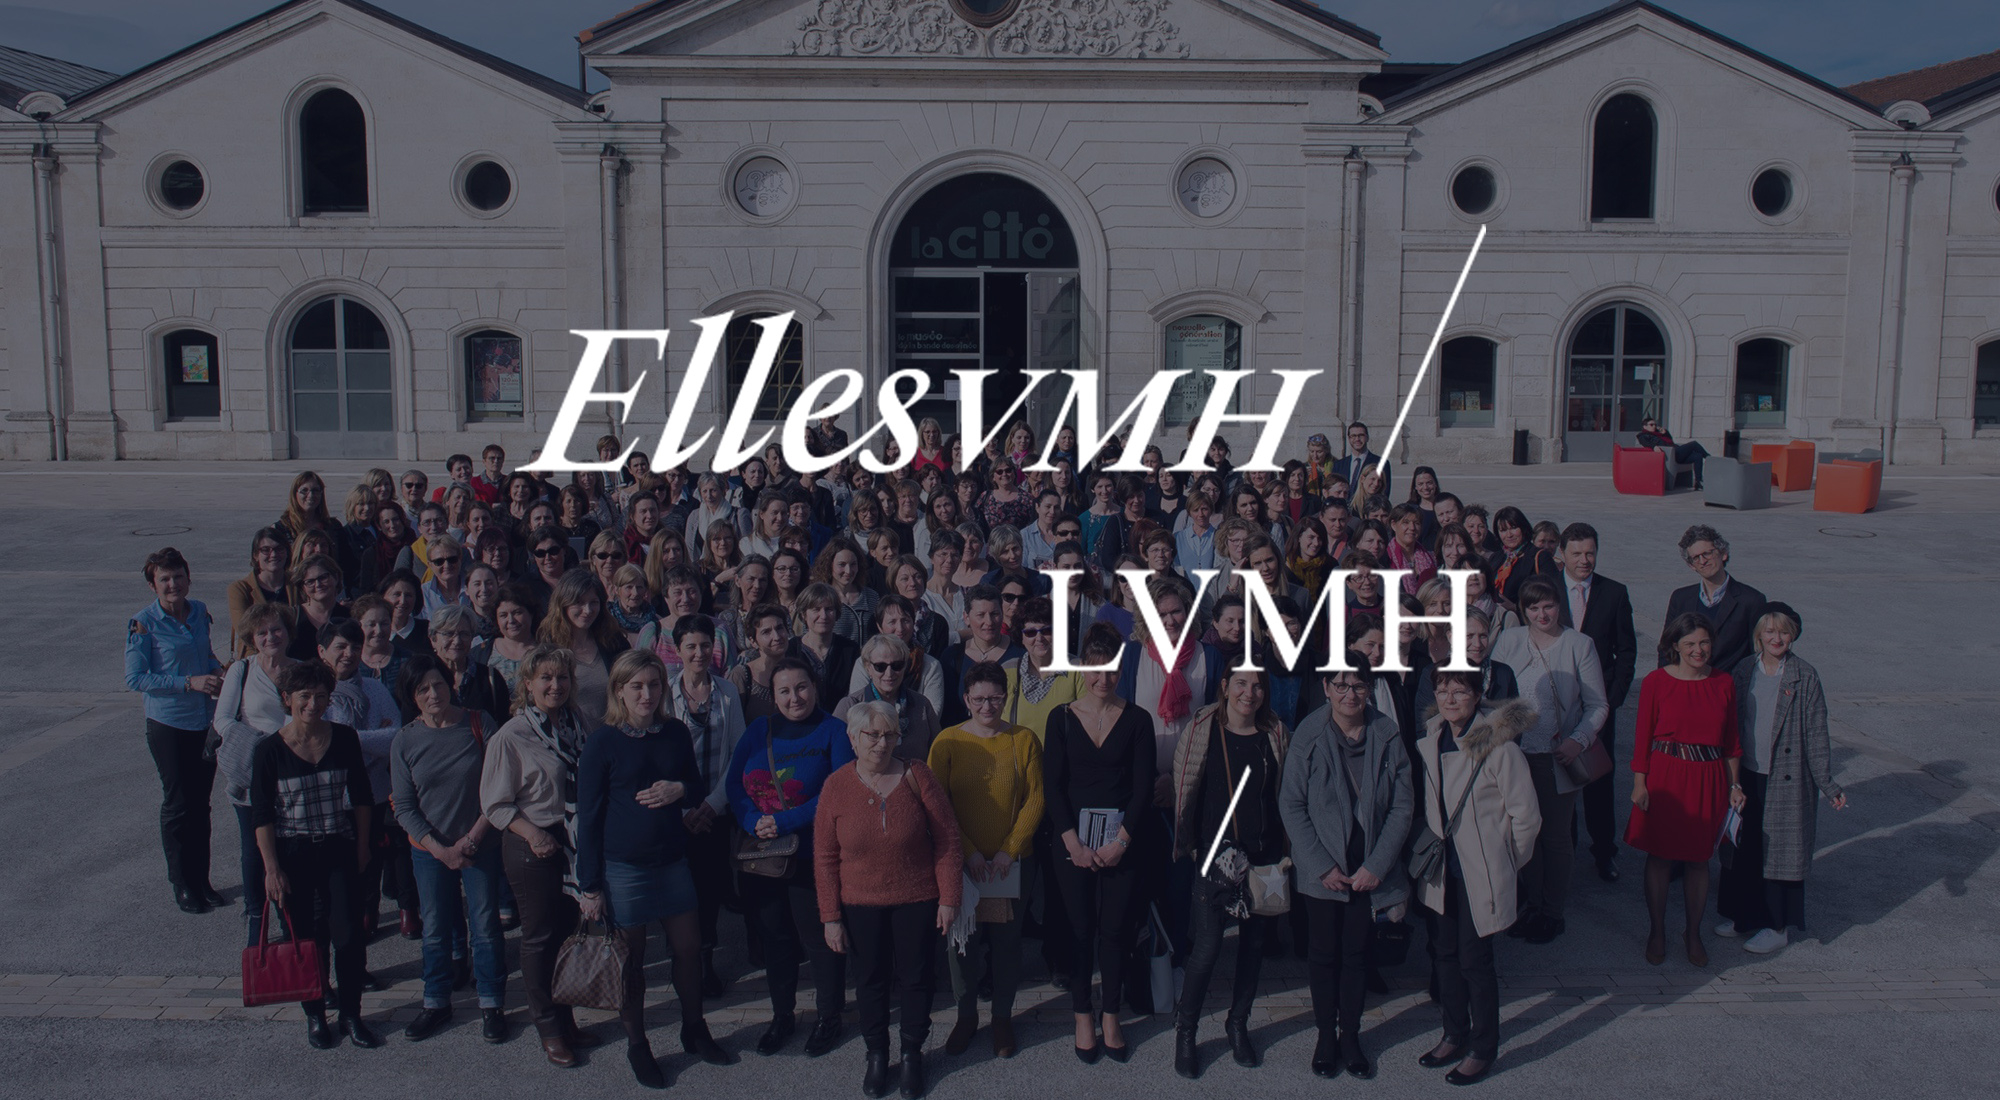 LVMH on X: “With Thélios, we have many challenges ahead, but we